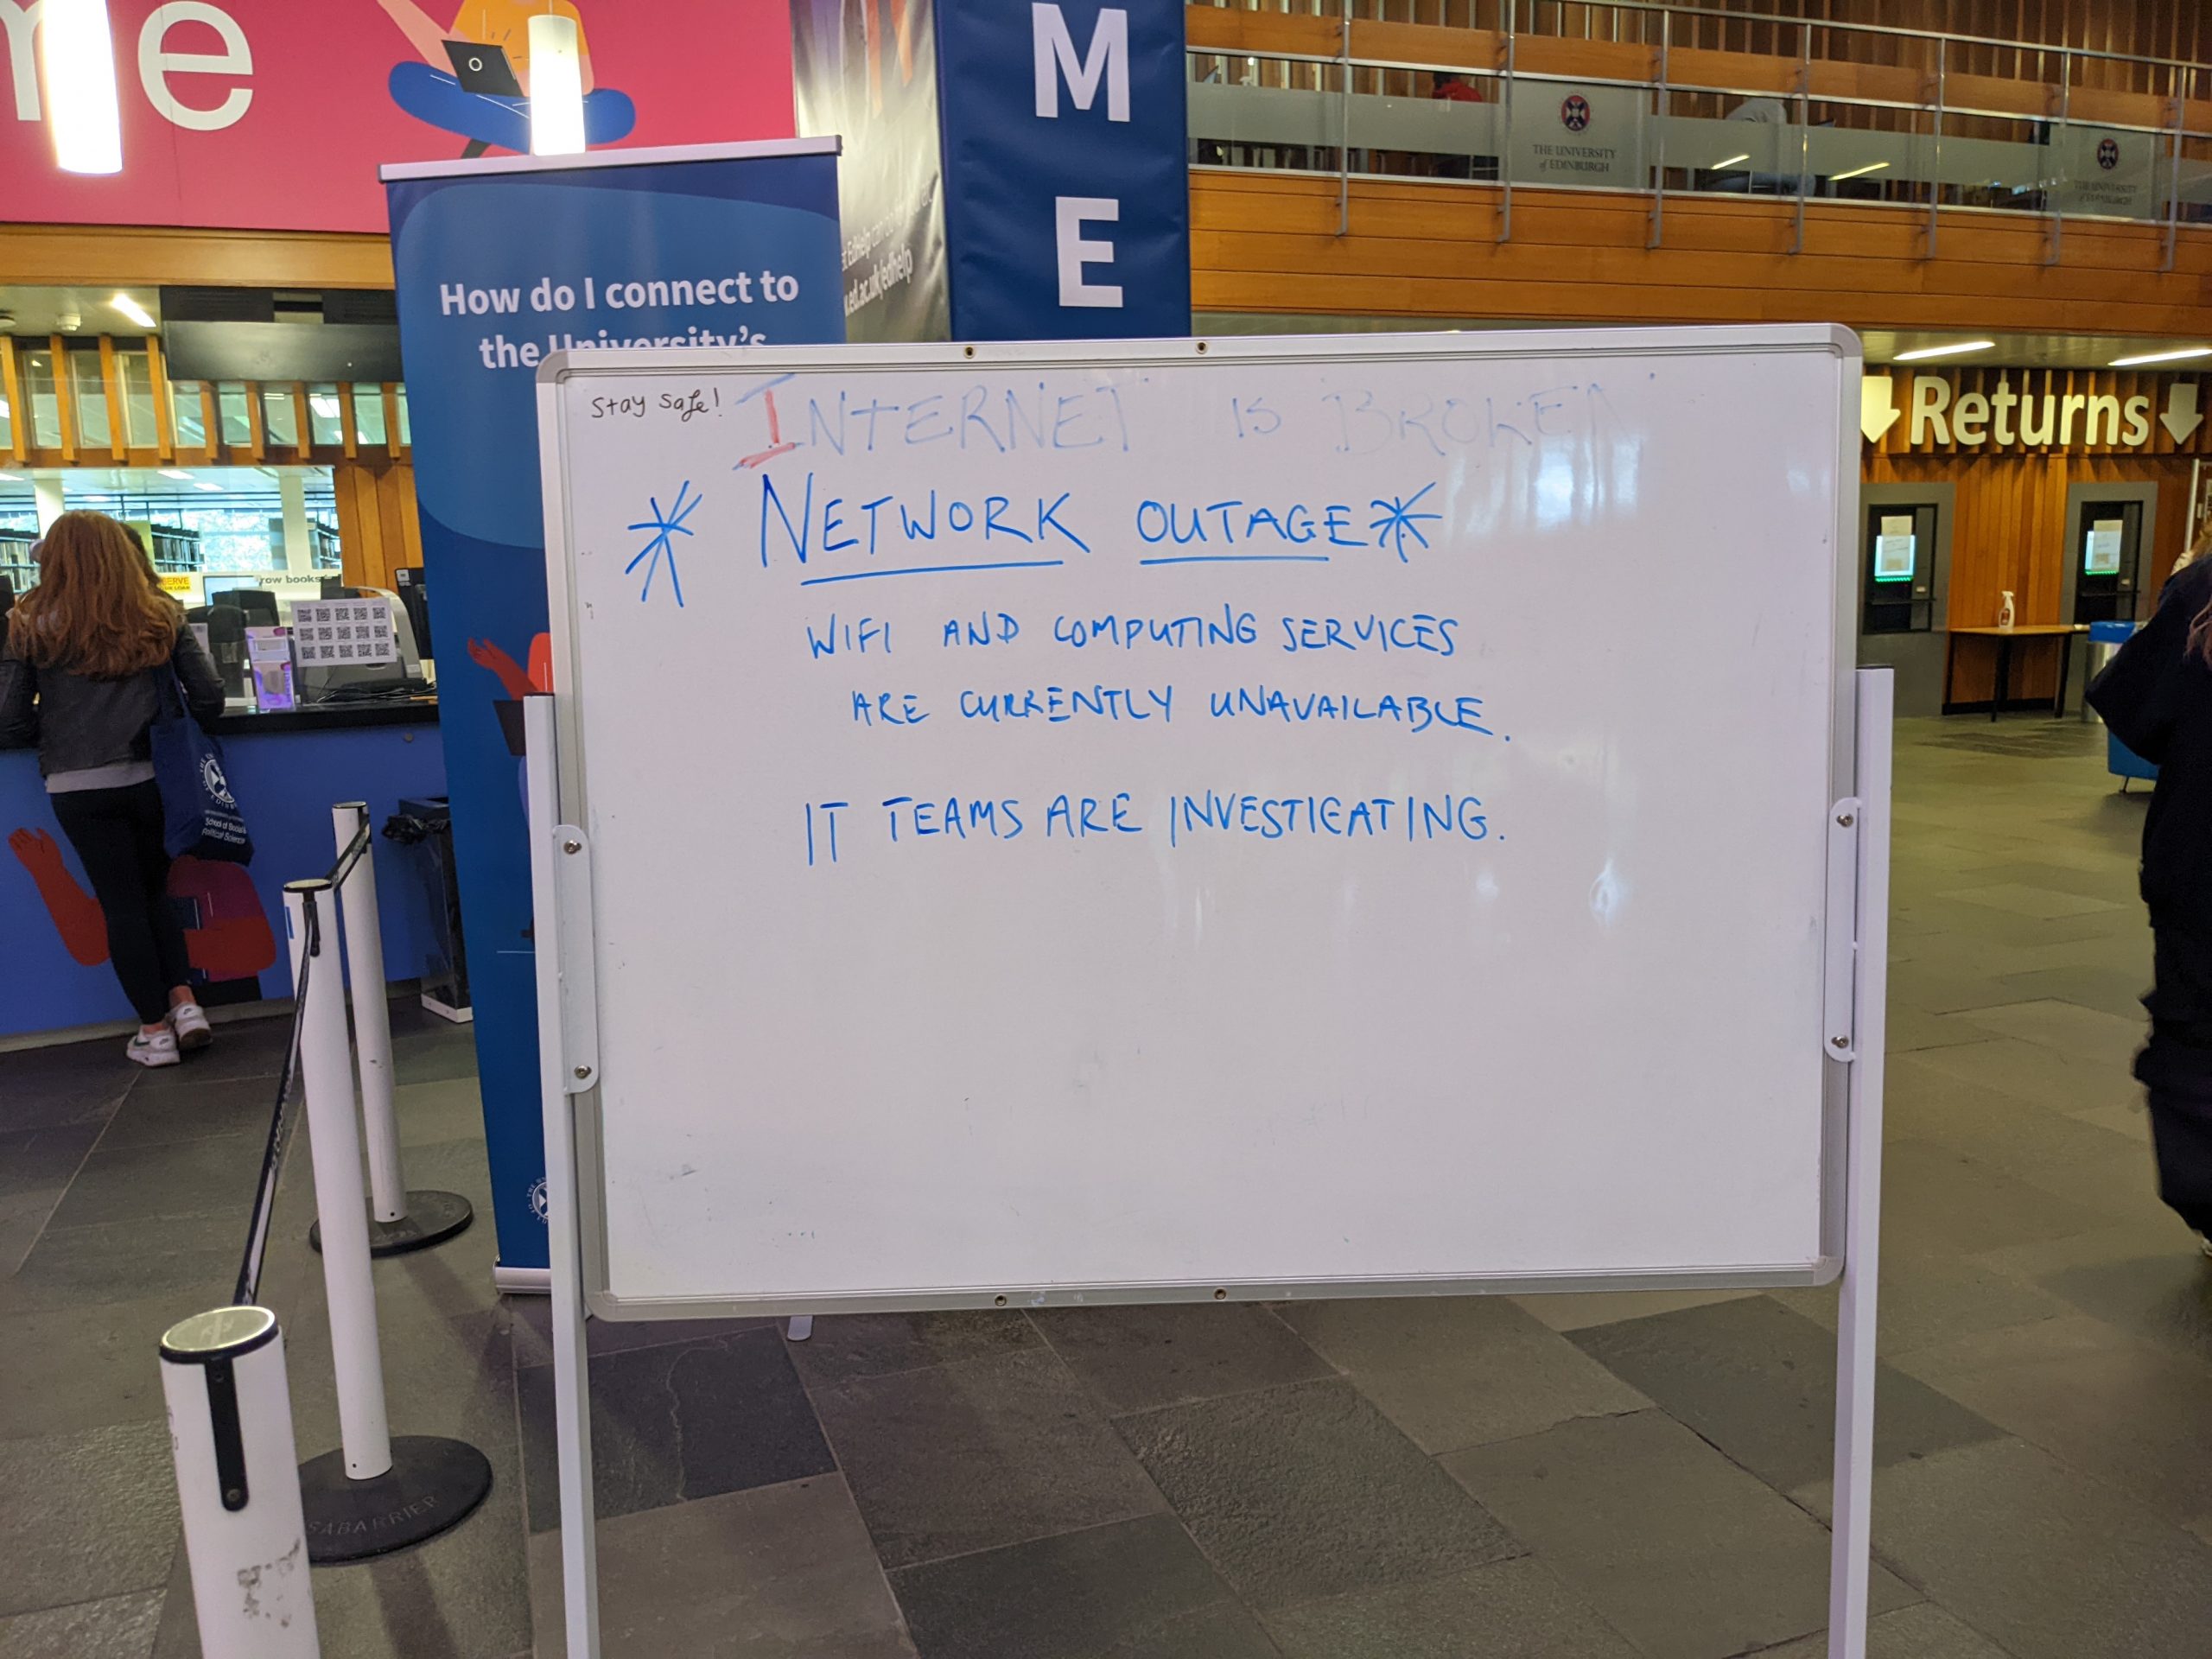 A sign in the University of Edinburgh main library saying wifi services are not functional.